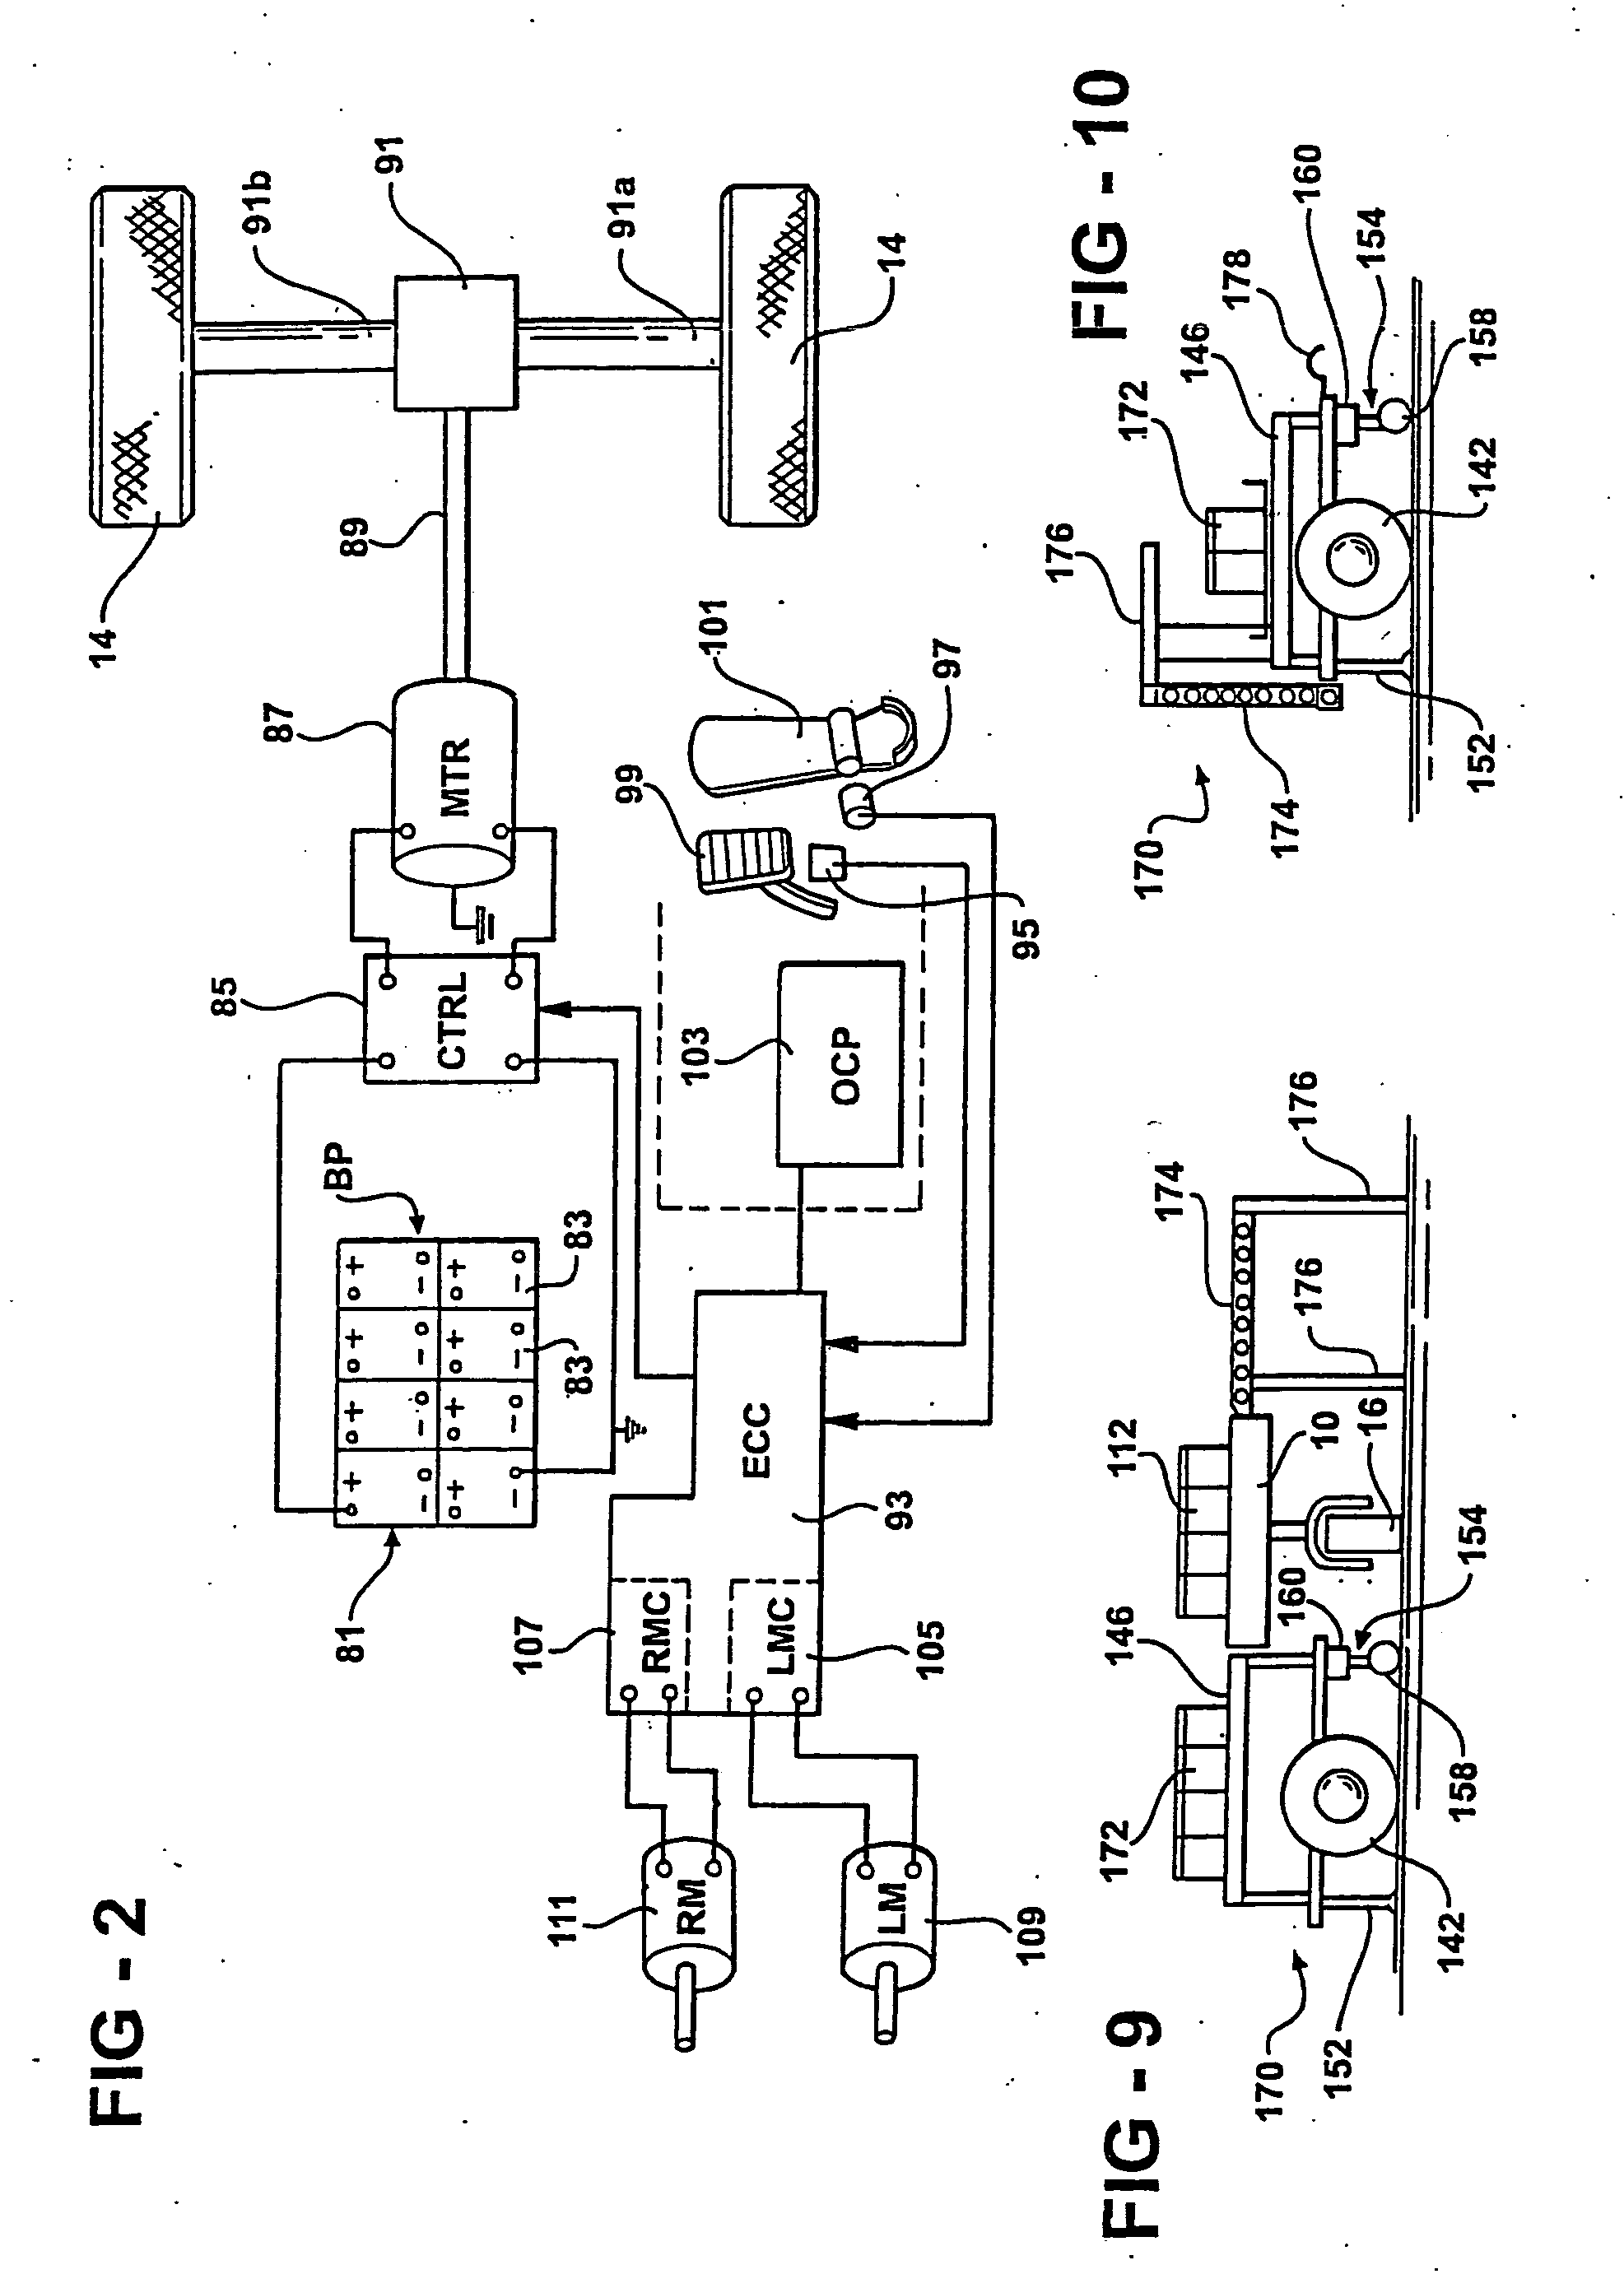 Electric drive mower with trailed auxiliary power source